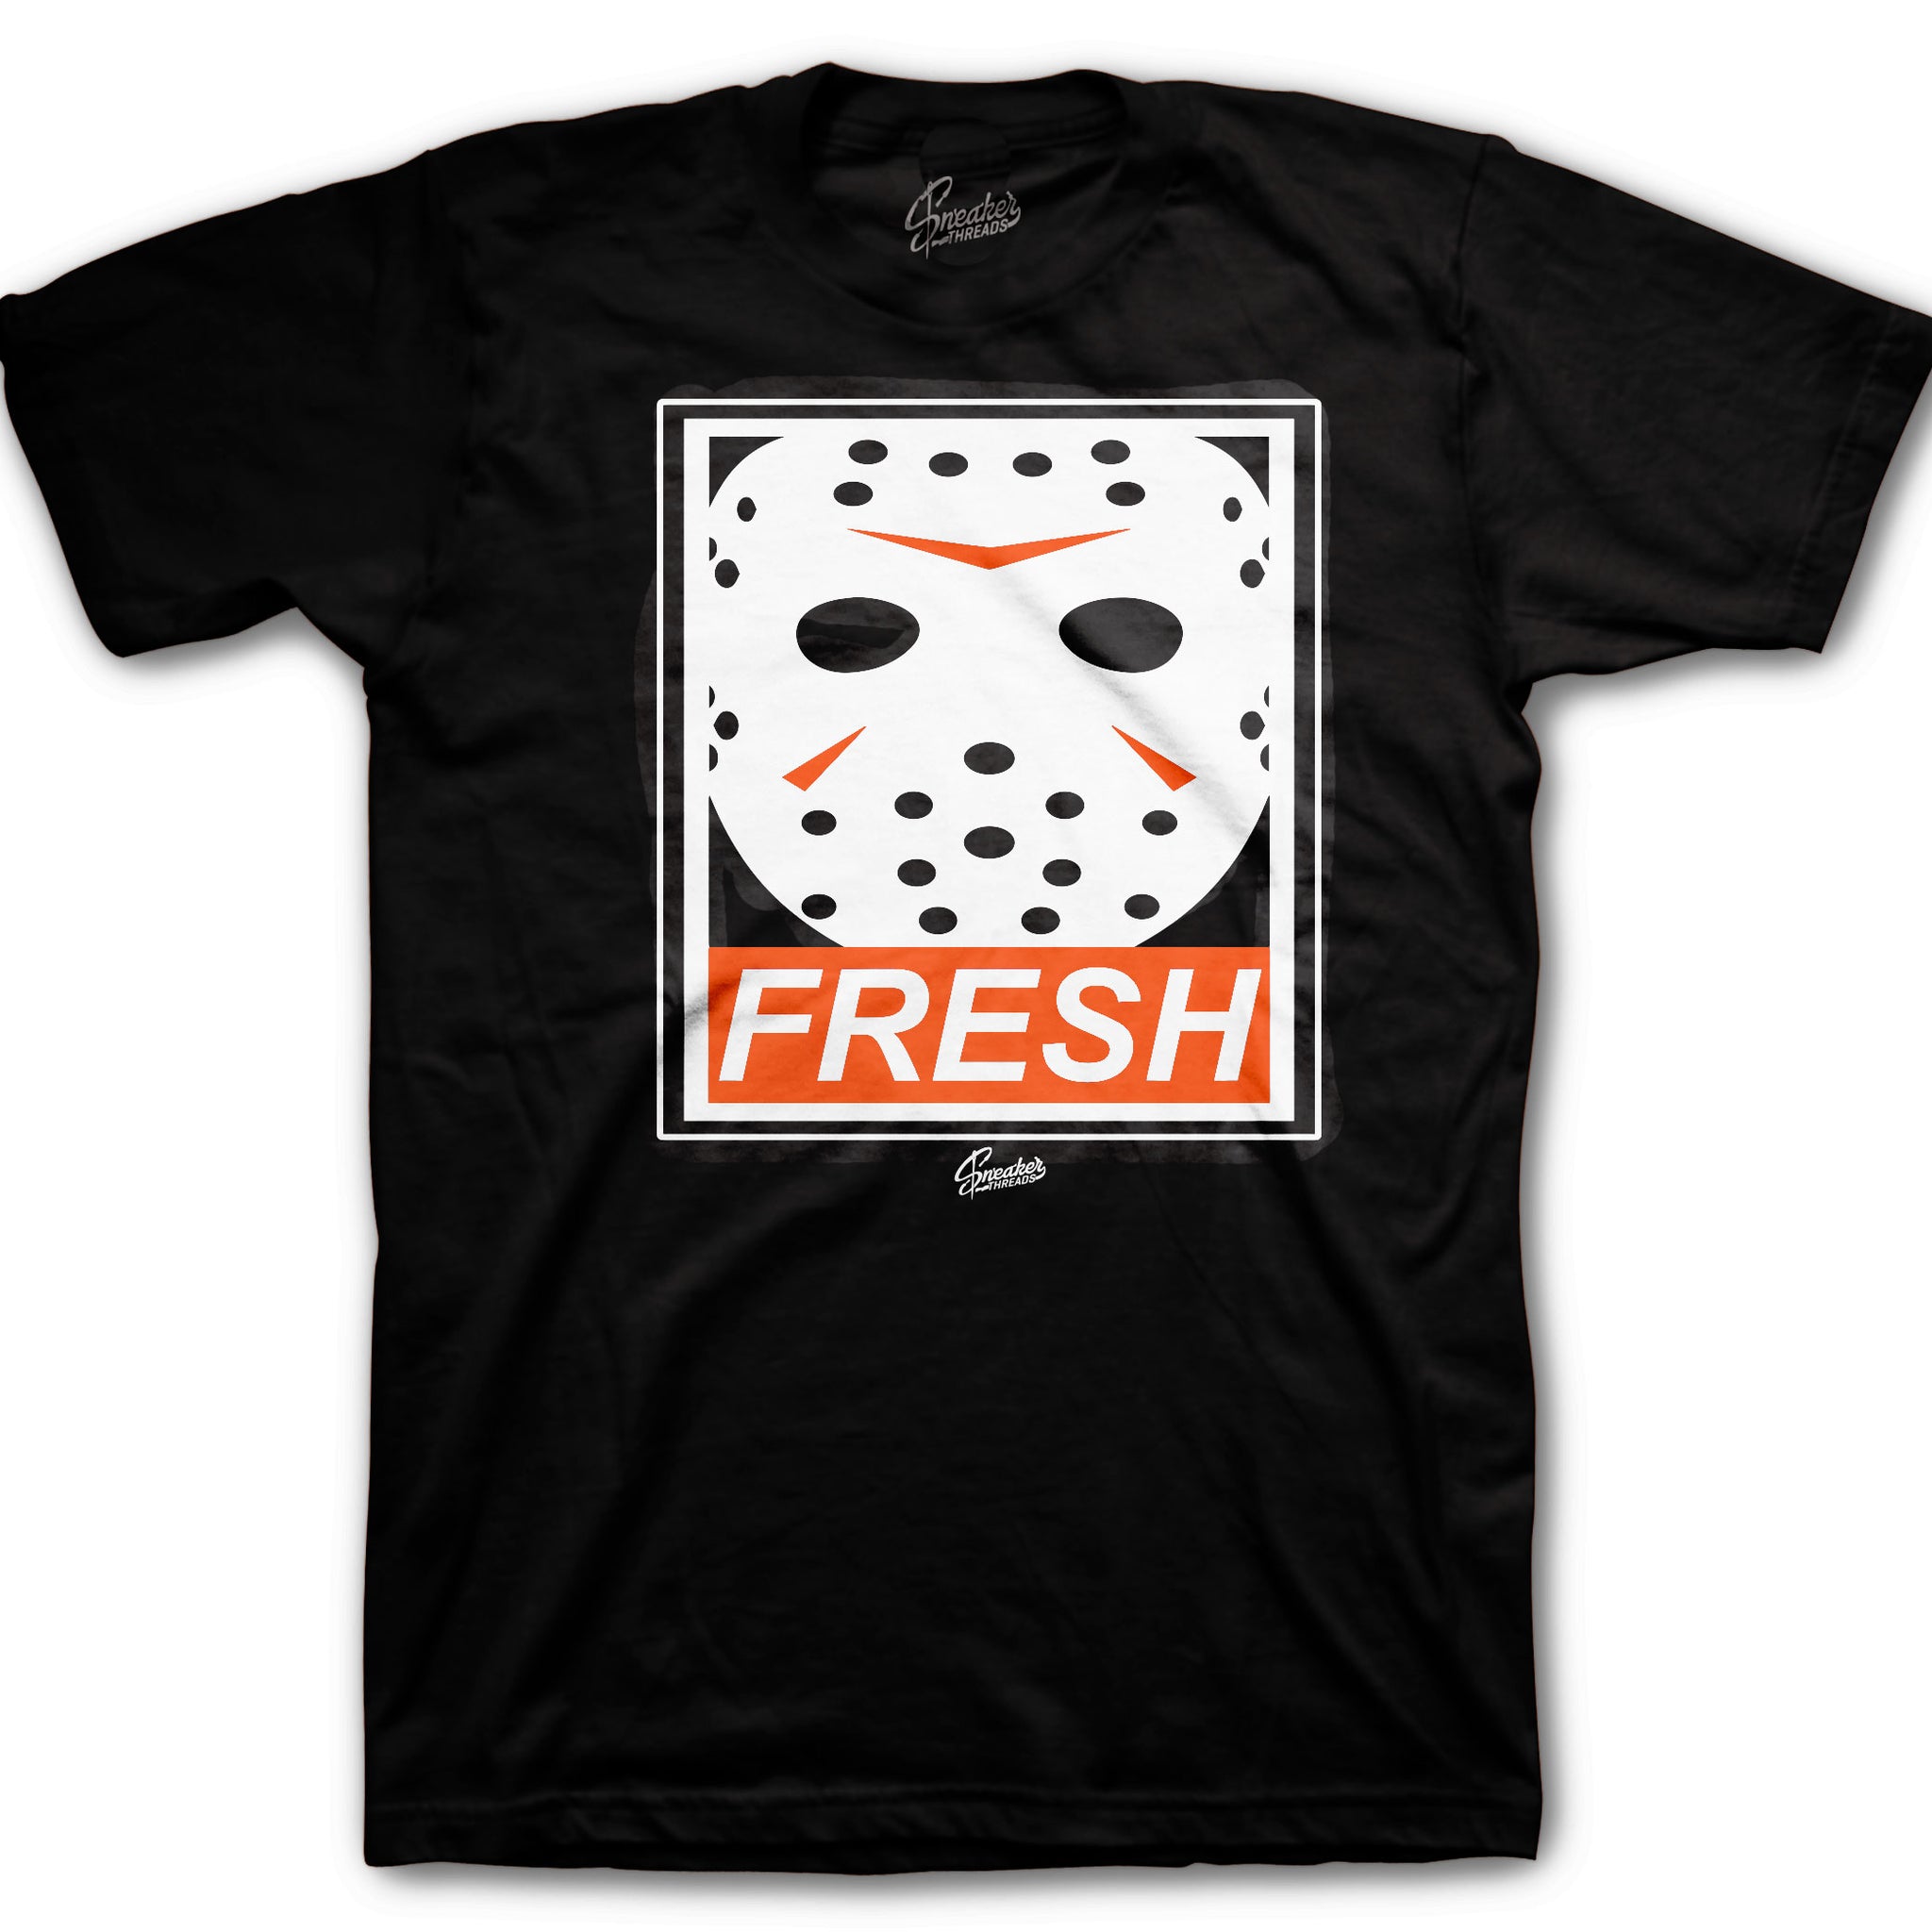 Halloween cool shirts to match Foams Shattered Backboard sneakers